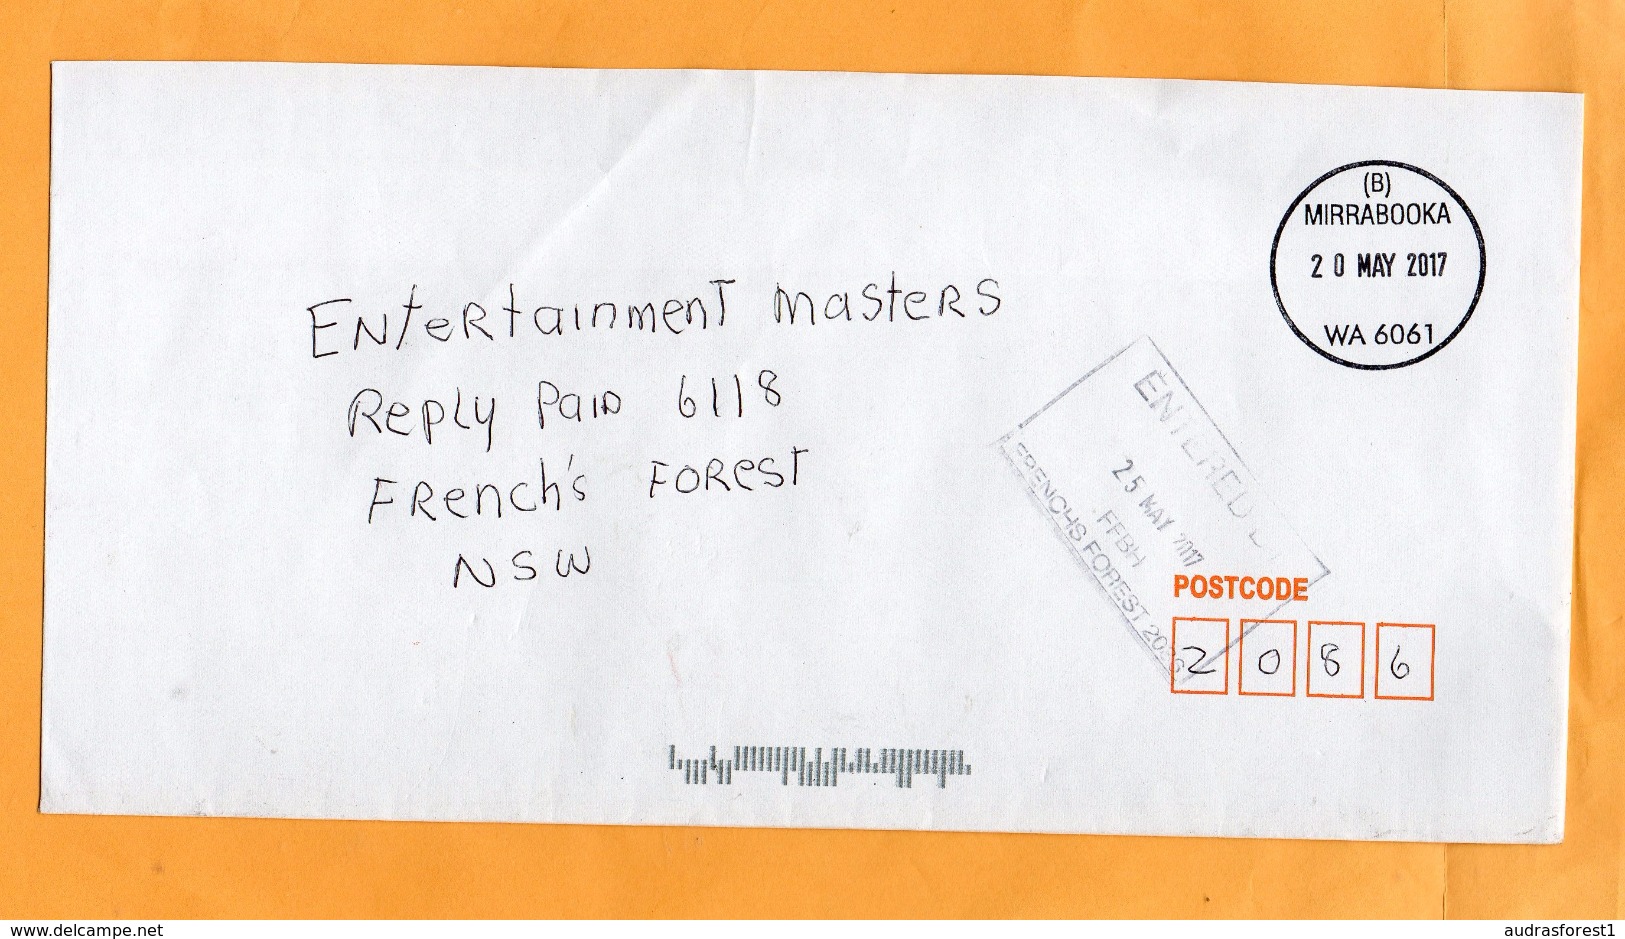 MY1055B (B) MIRRABOOKA WA 6061 FULL CIRCULAR POSTMARK Dated 22 MAY 2017 Complete Cover + Frenchs FOREST Receipt4 - Briefe U. Dokumente